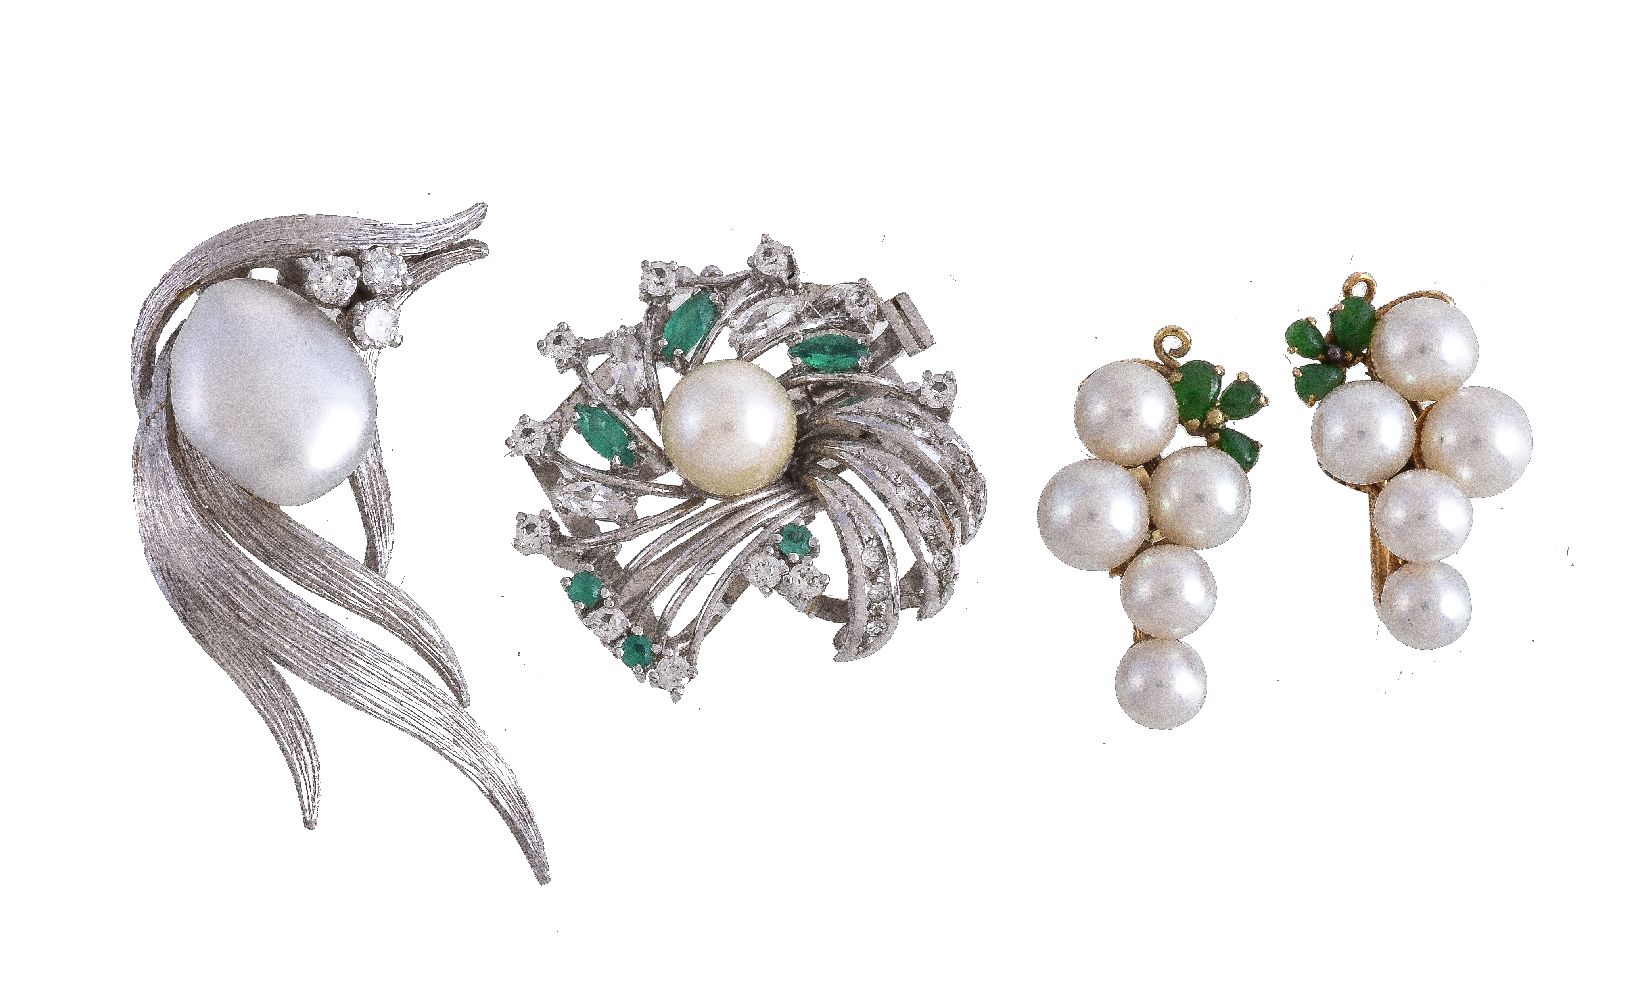 A pair of cultured pearl earrings, set with a cluster of cultured pearls, with green stone